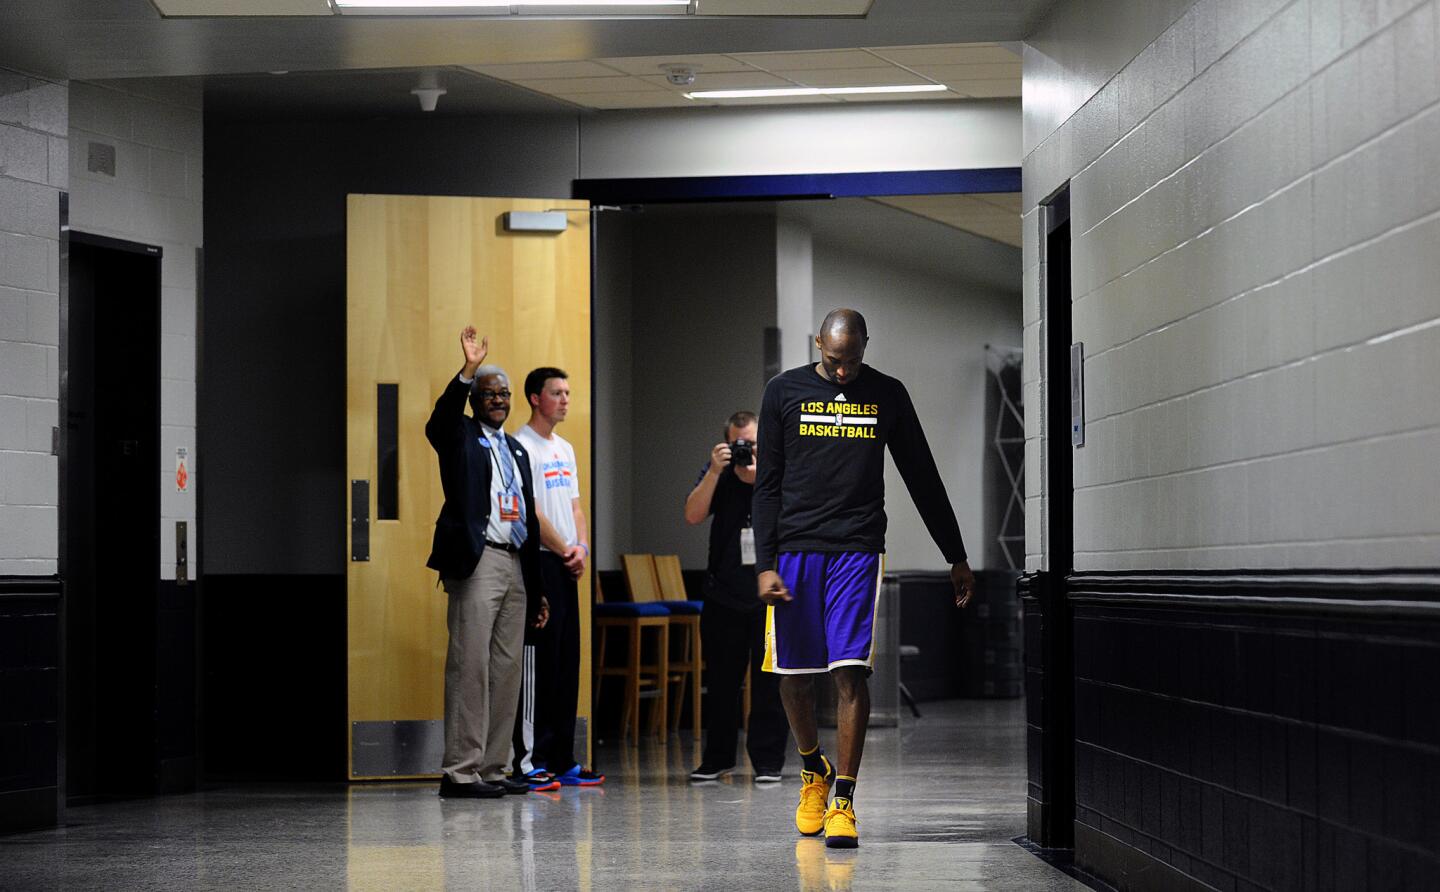 Kobe Bryant walks the hallway as he comes back out to the court during halftime against the Thunder in Oklahoma City on April 11.